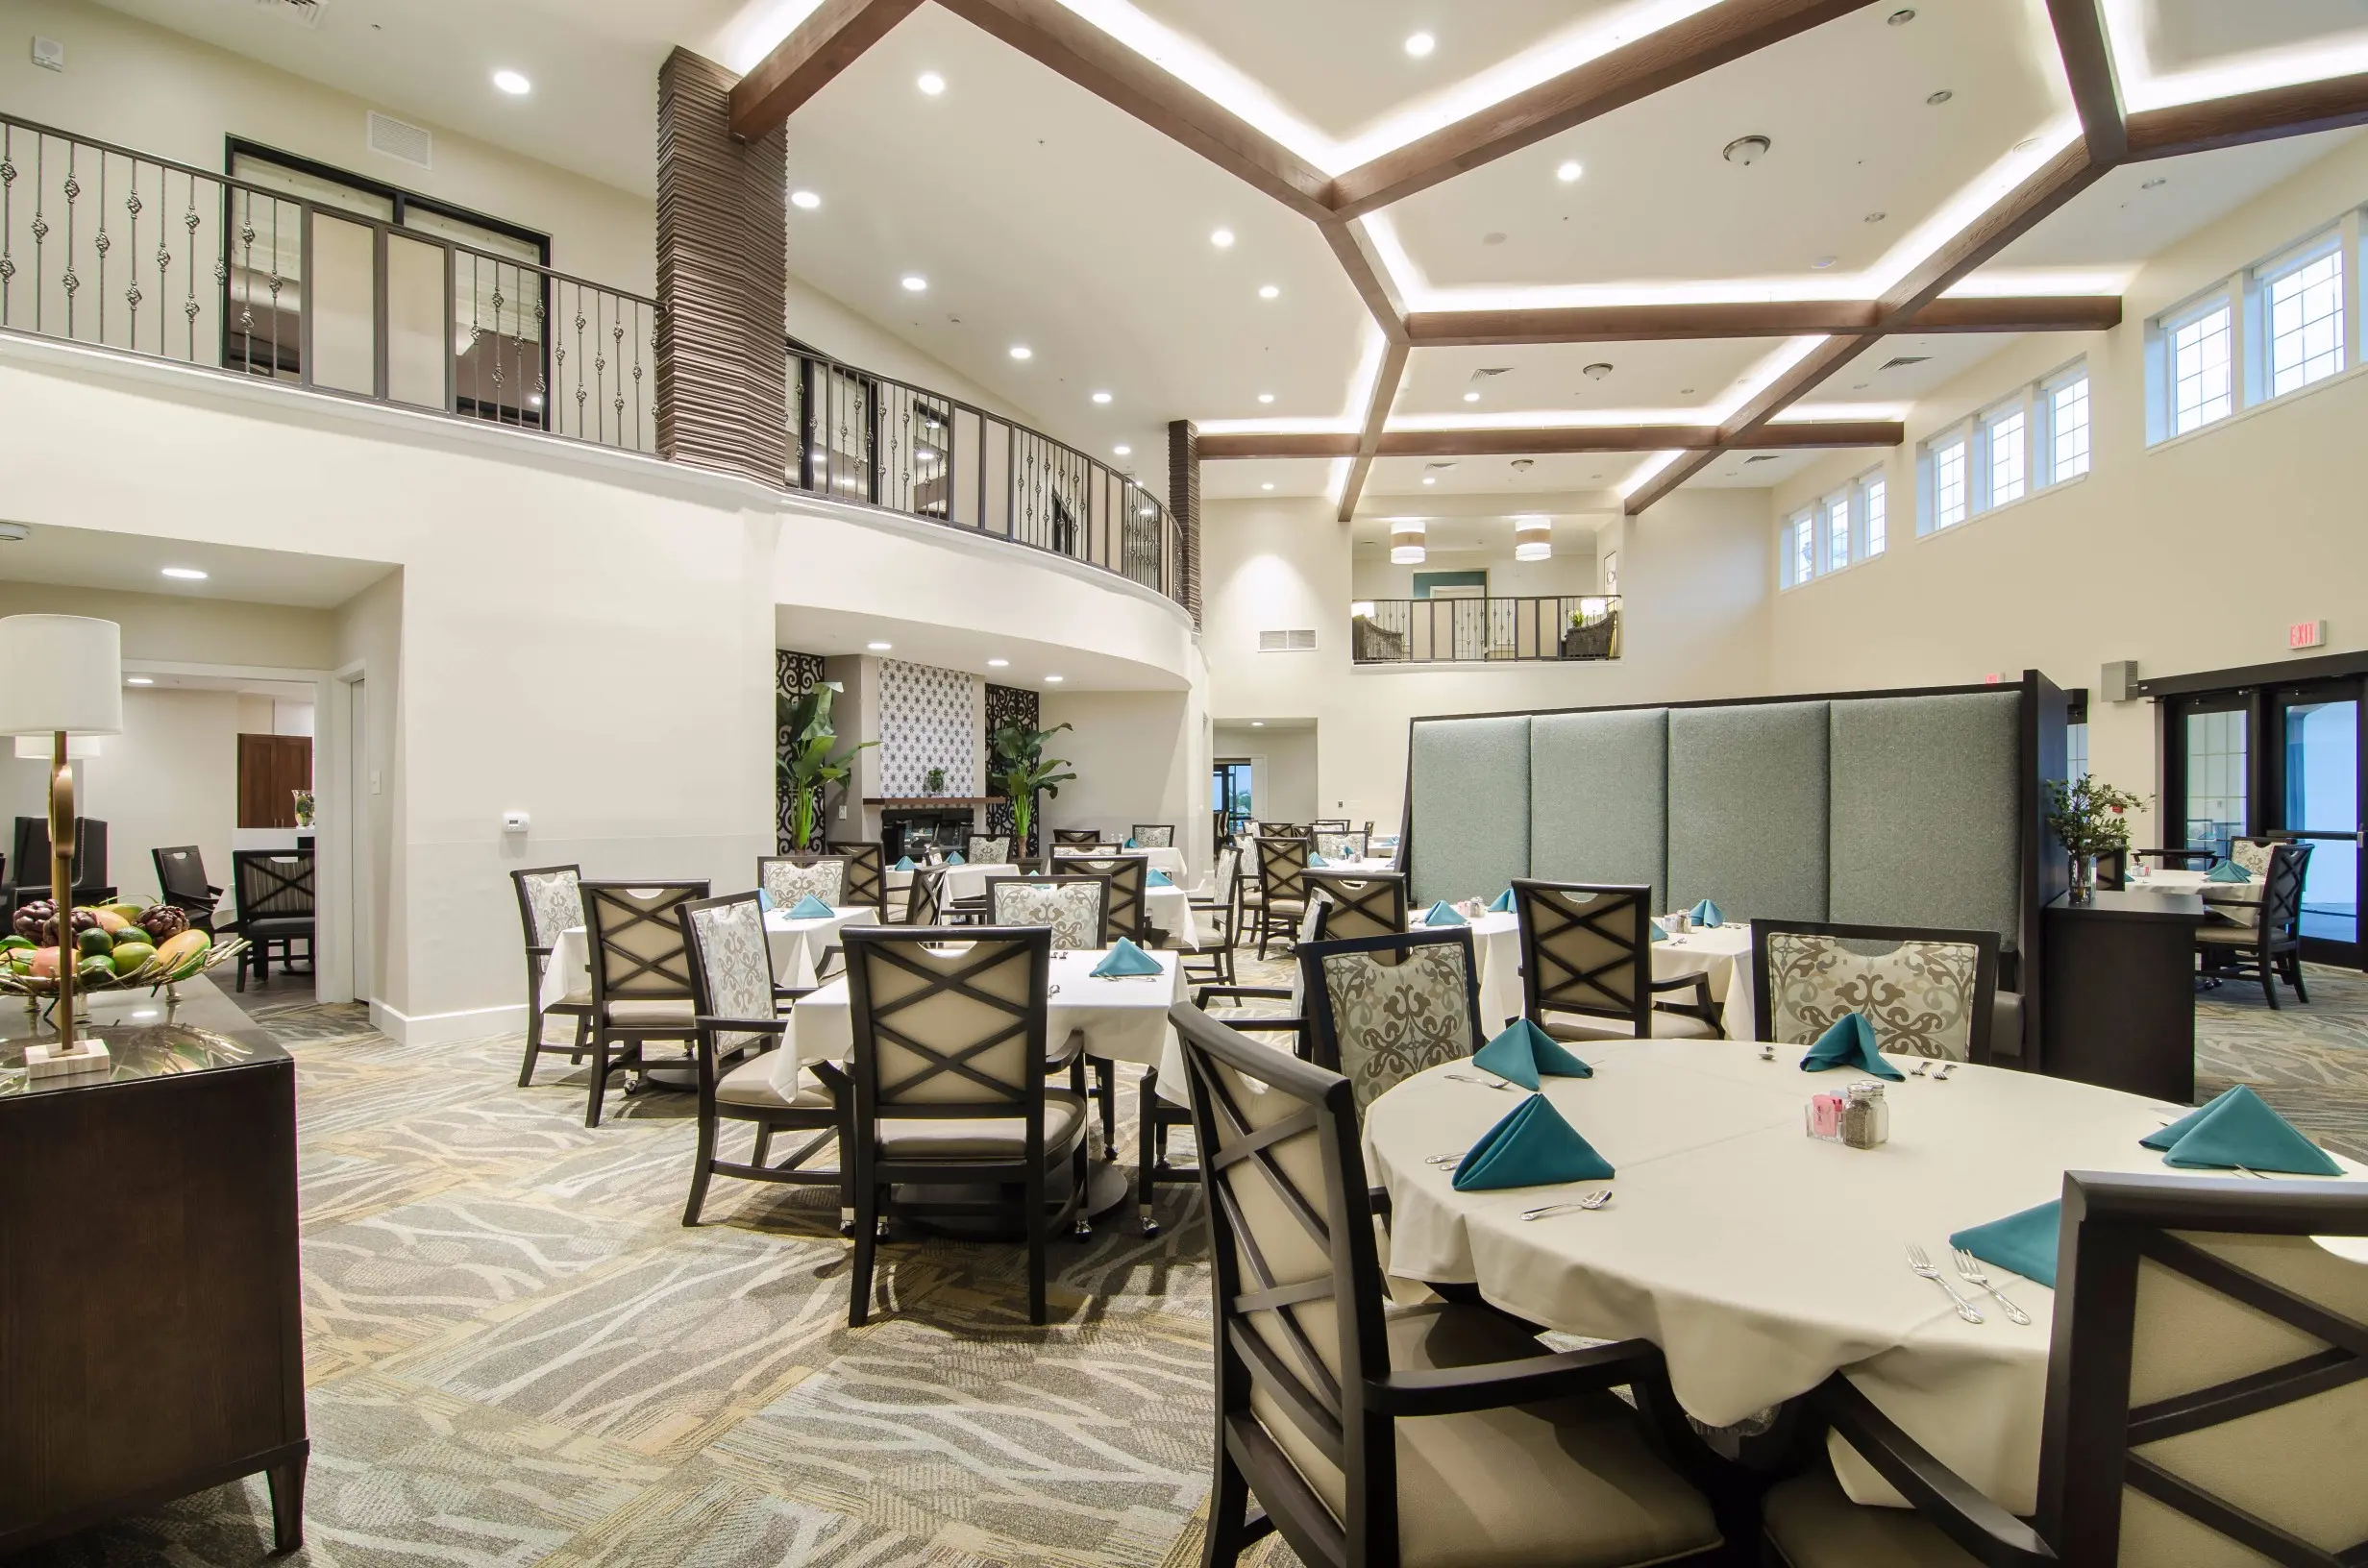 Large carpeted dining area at American House Coconut Point, a senior living community in Estero, FL